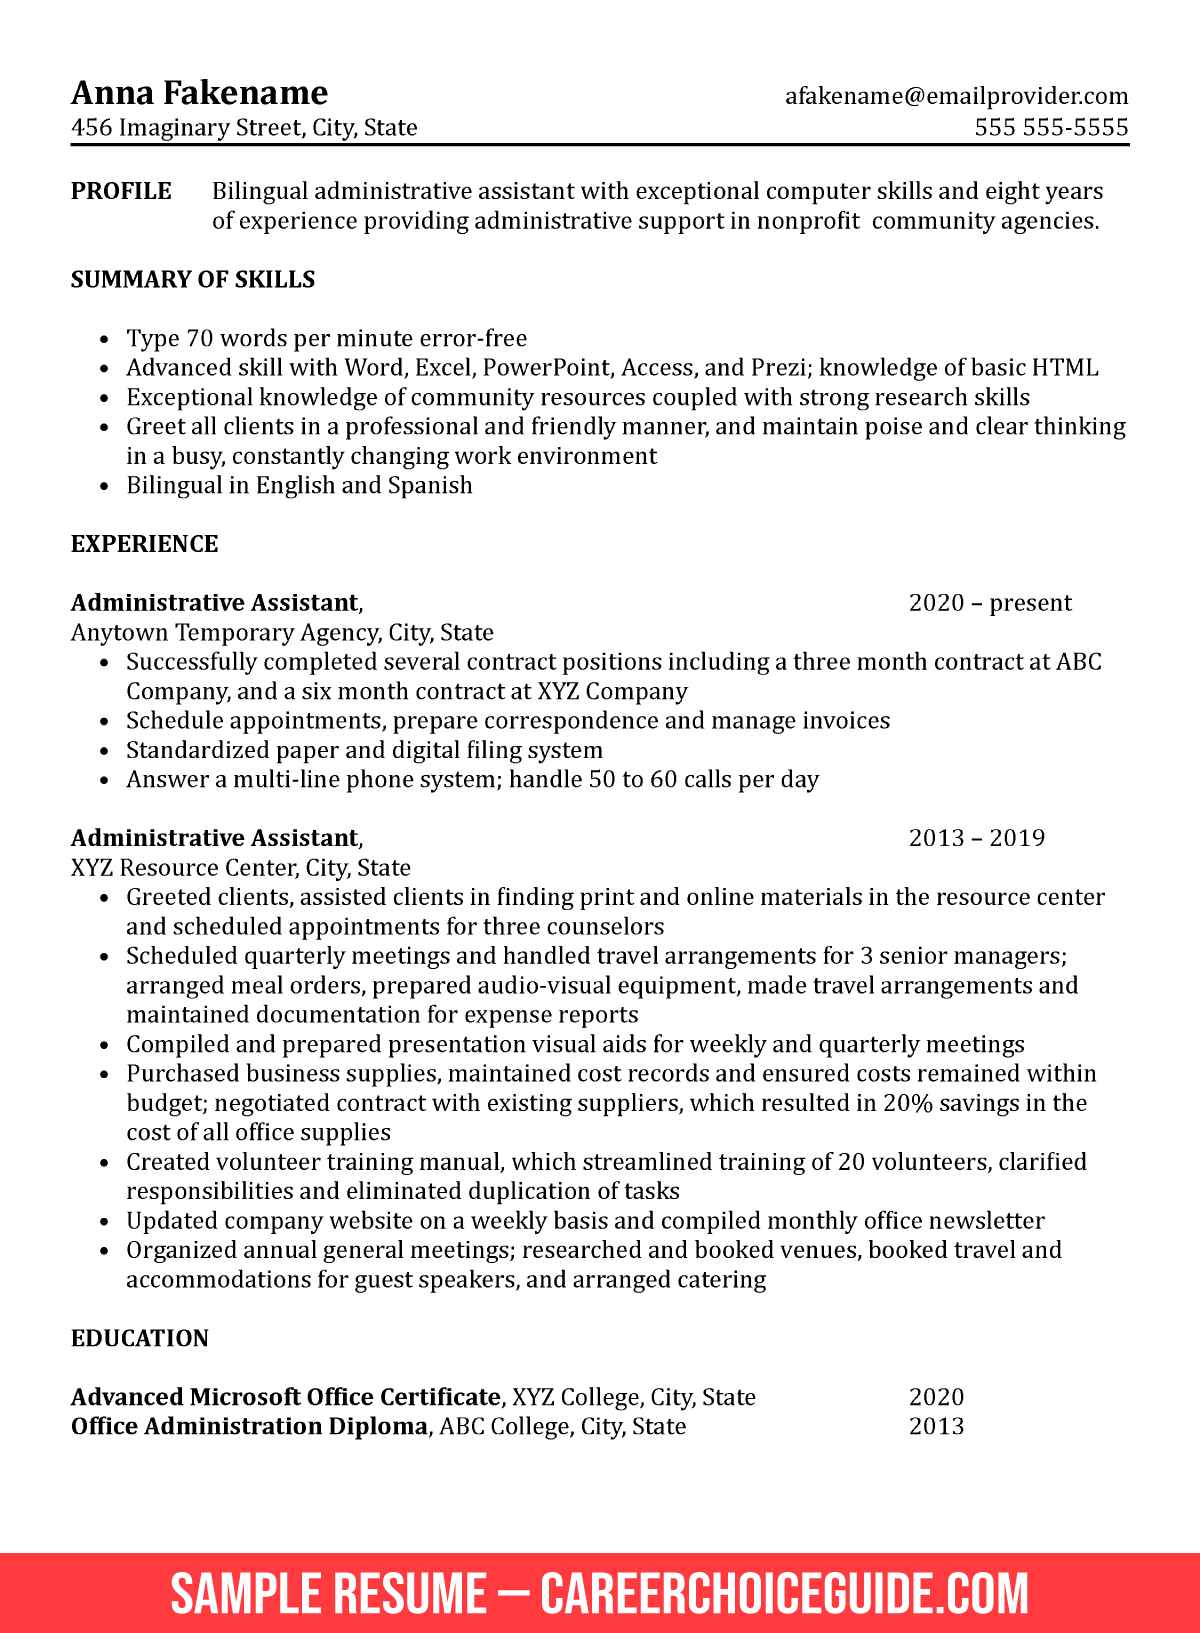 resume template for administrative assistant free